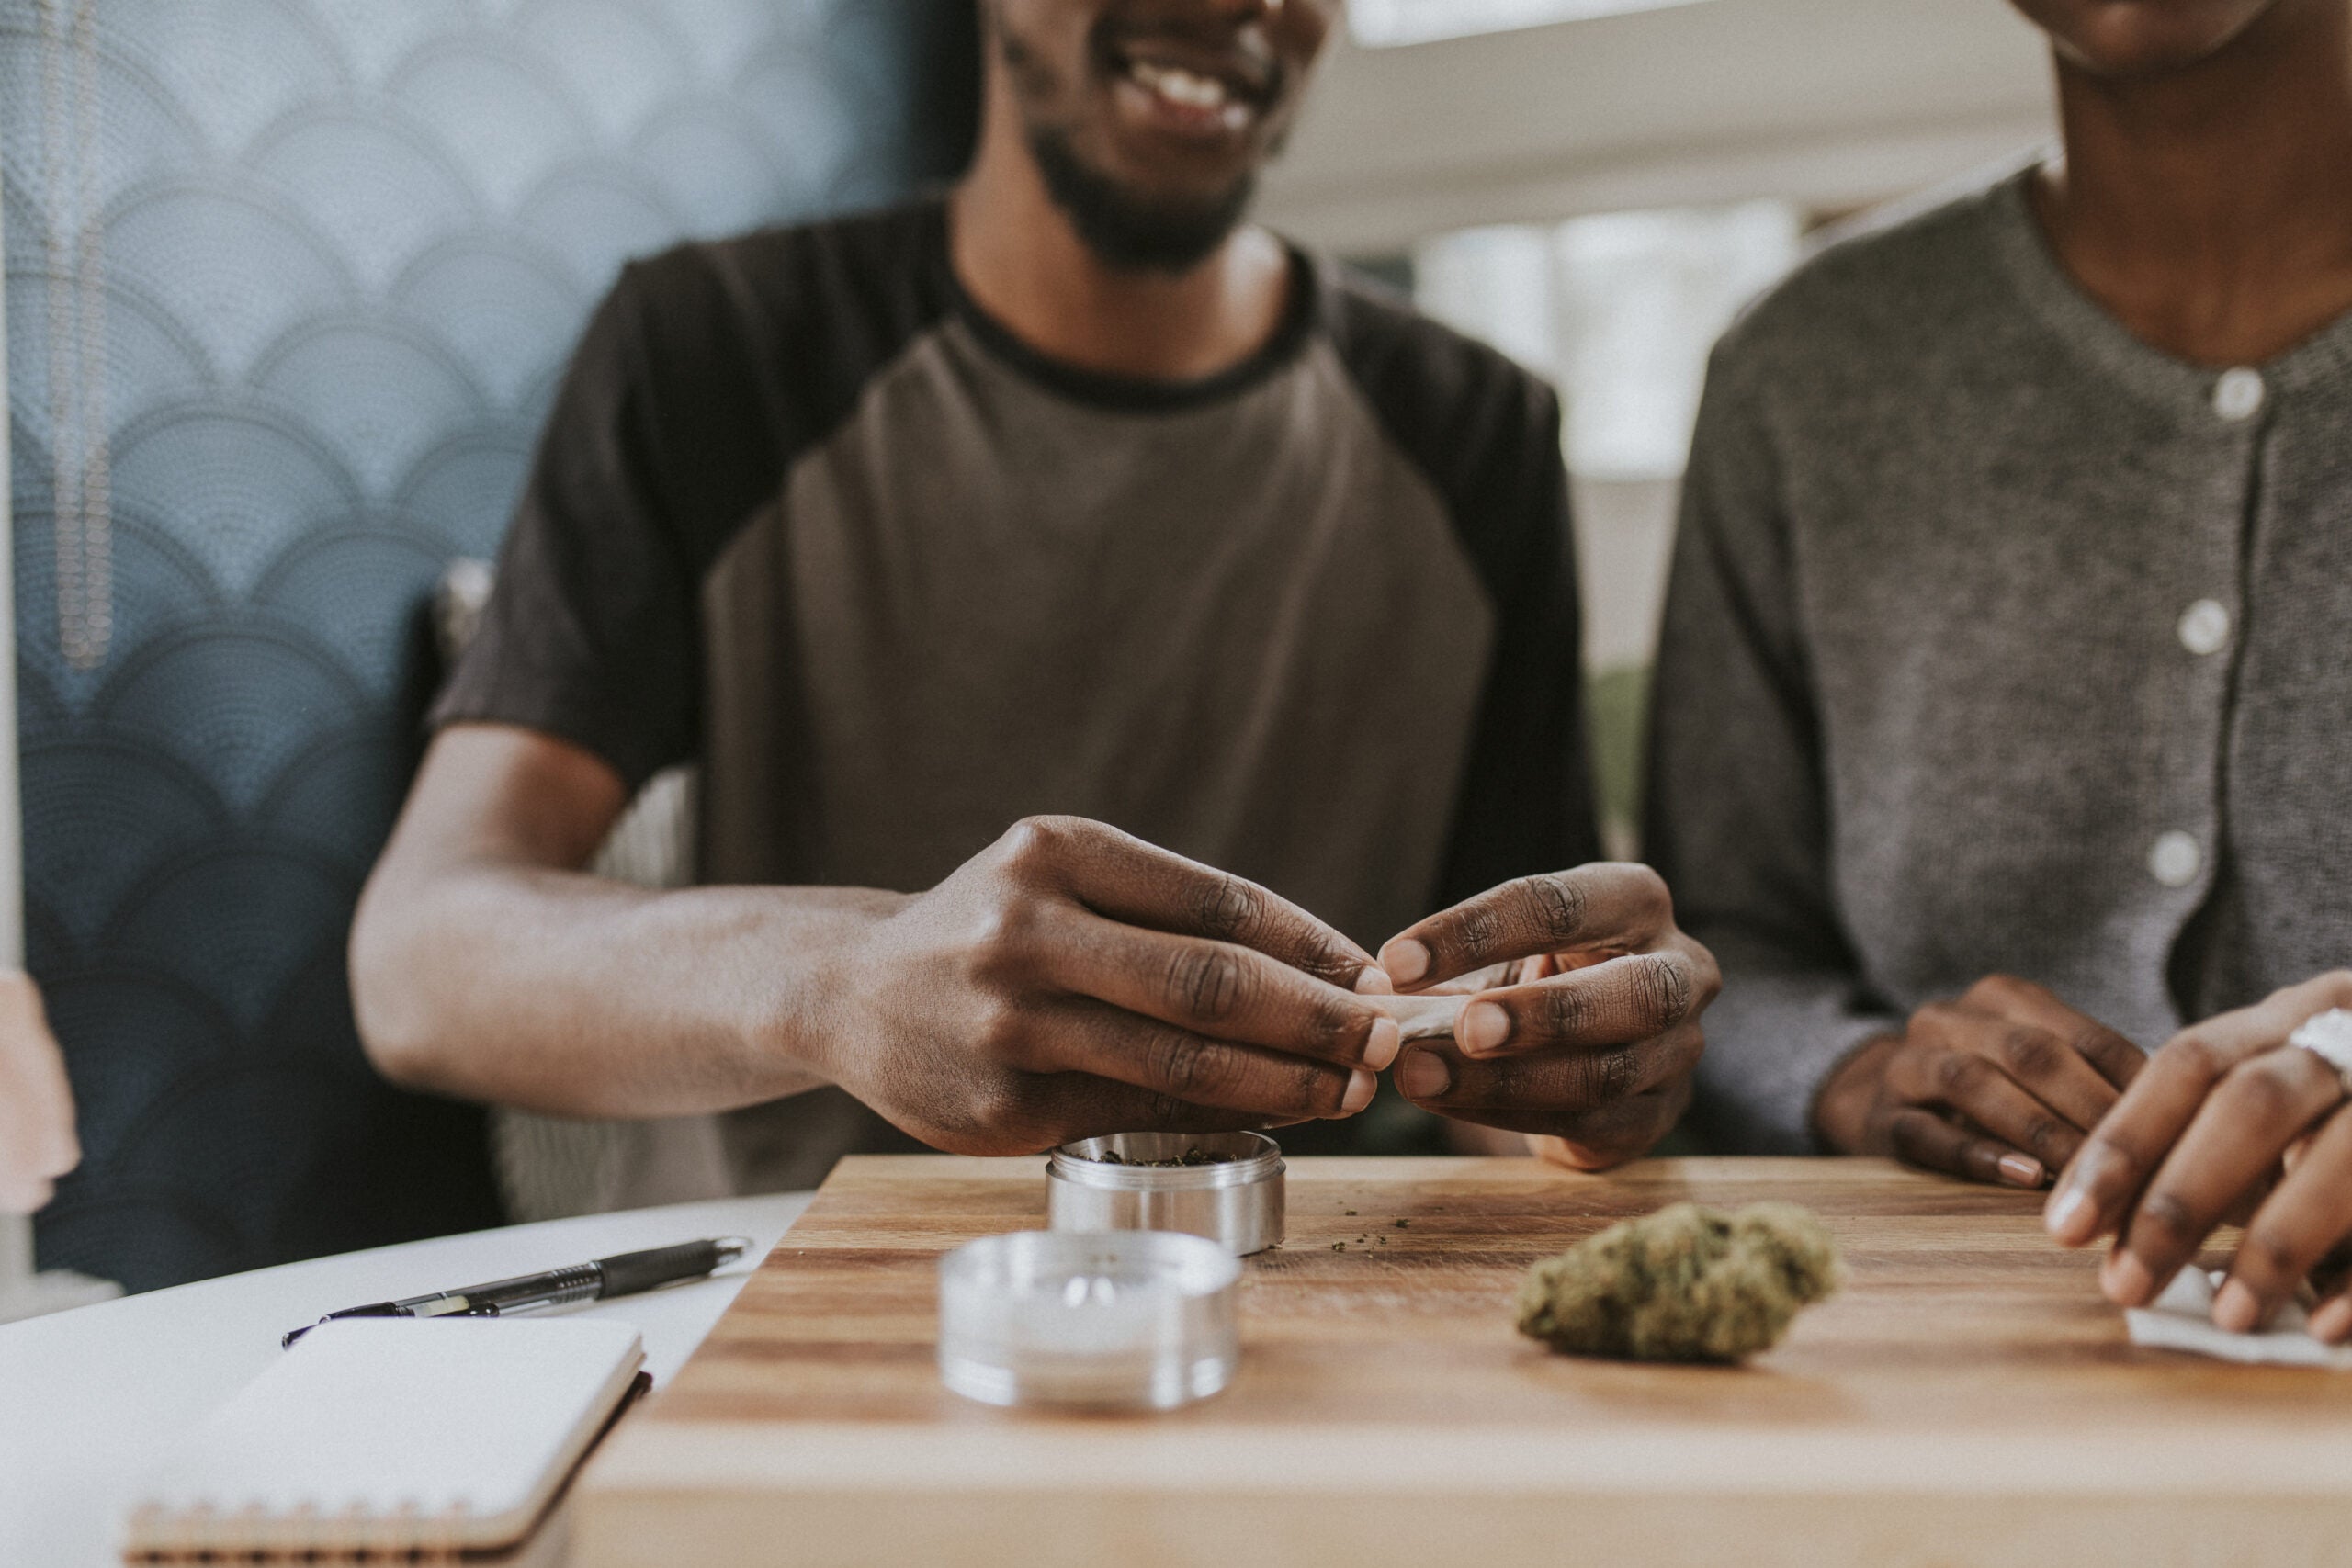 Illinois Bring-Your-Own-Cannabis Lounges Beginning To Take Off - Marijuana Packaging